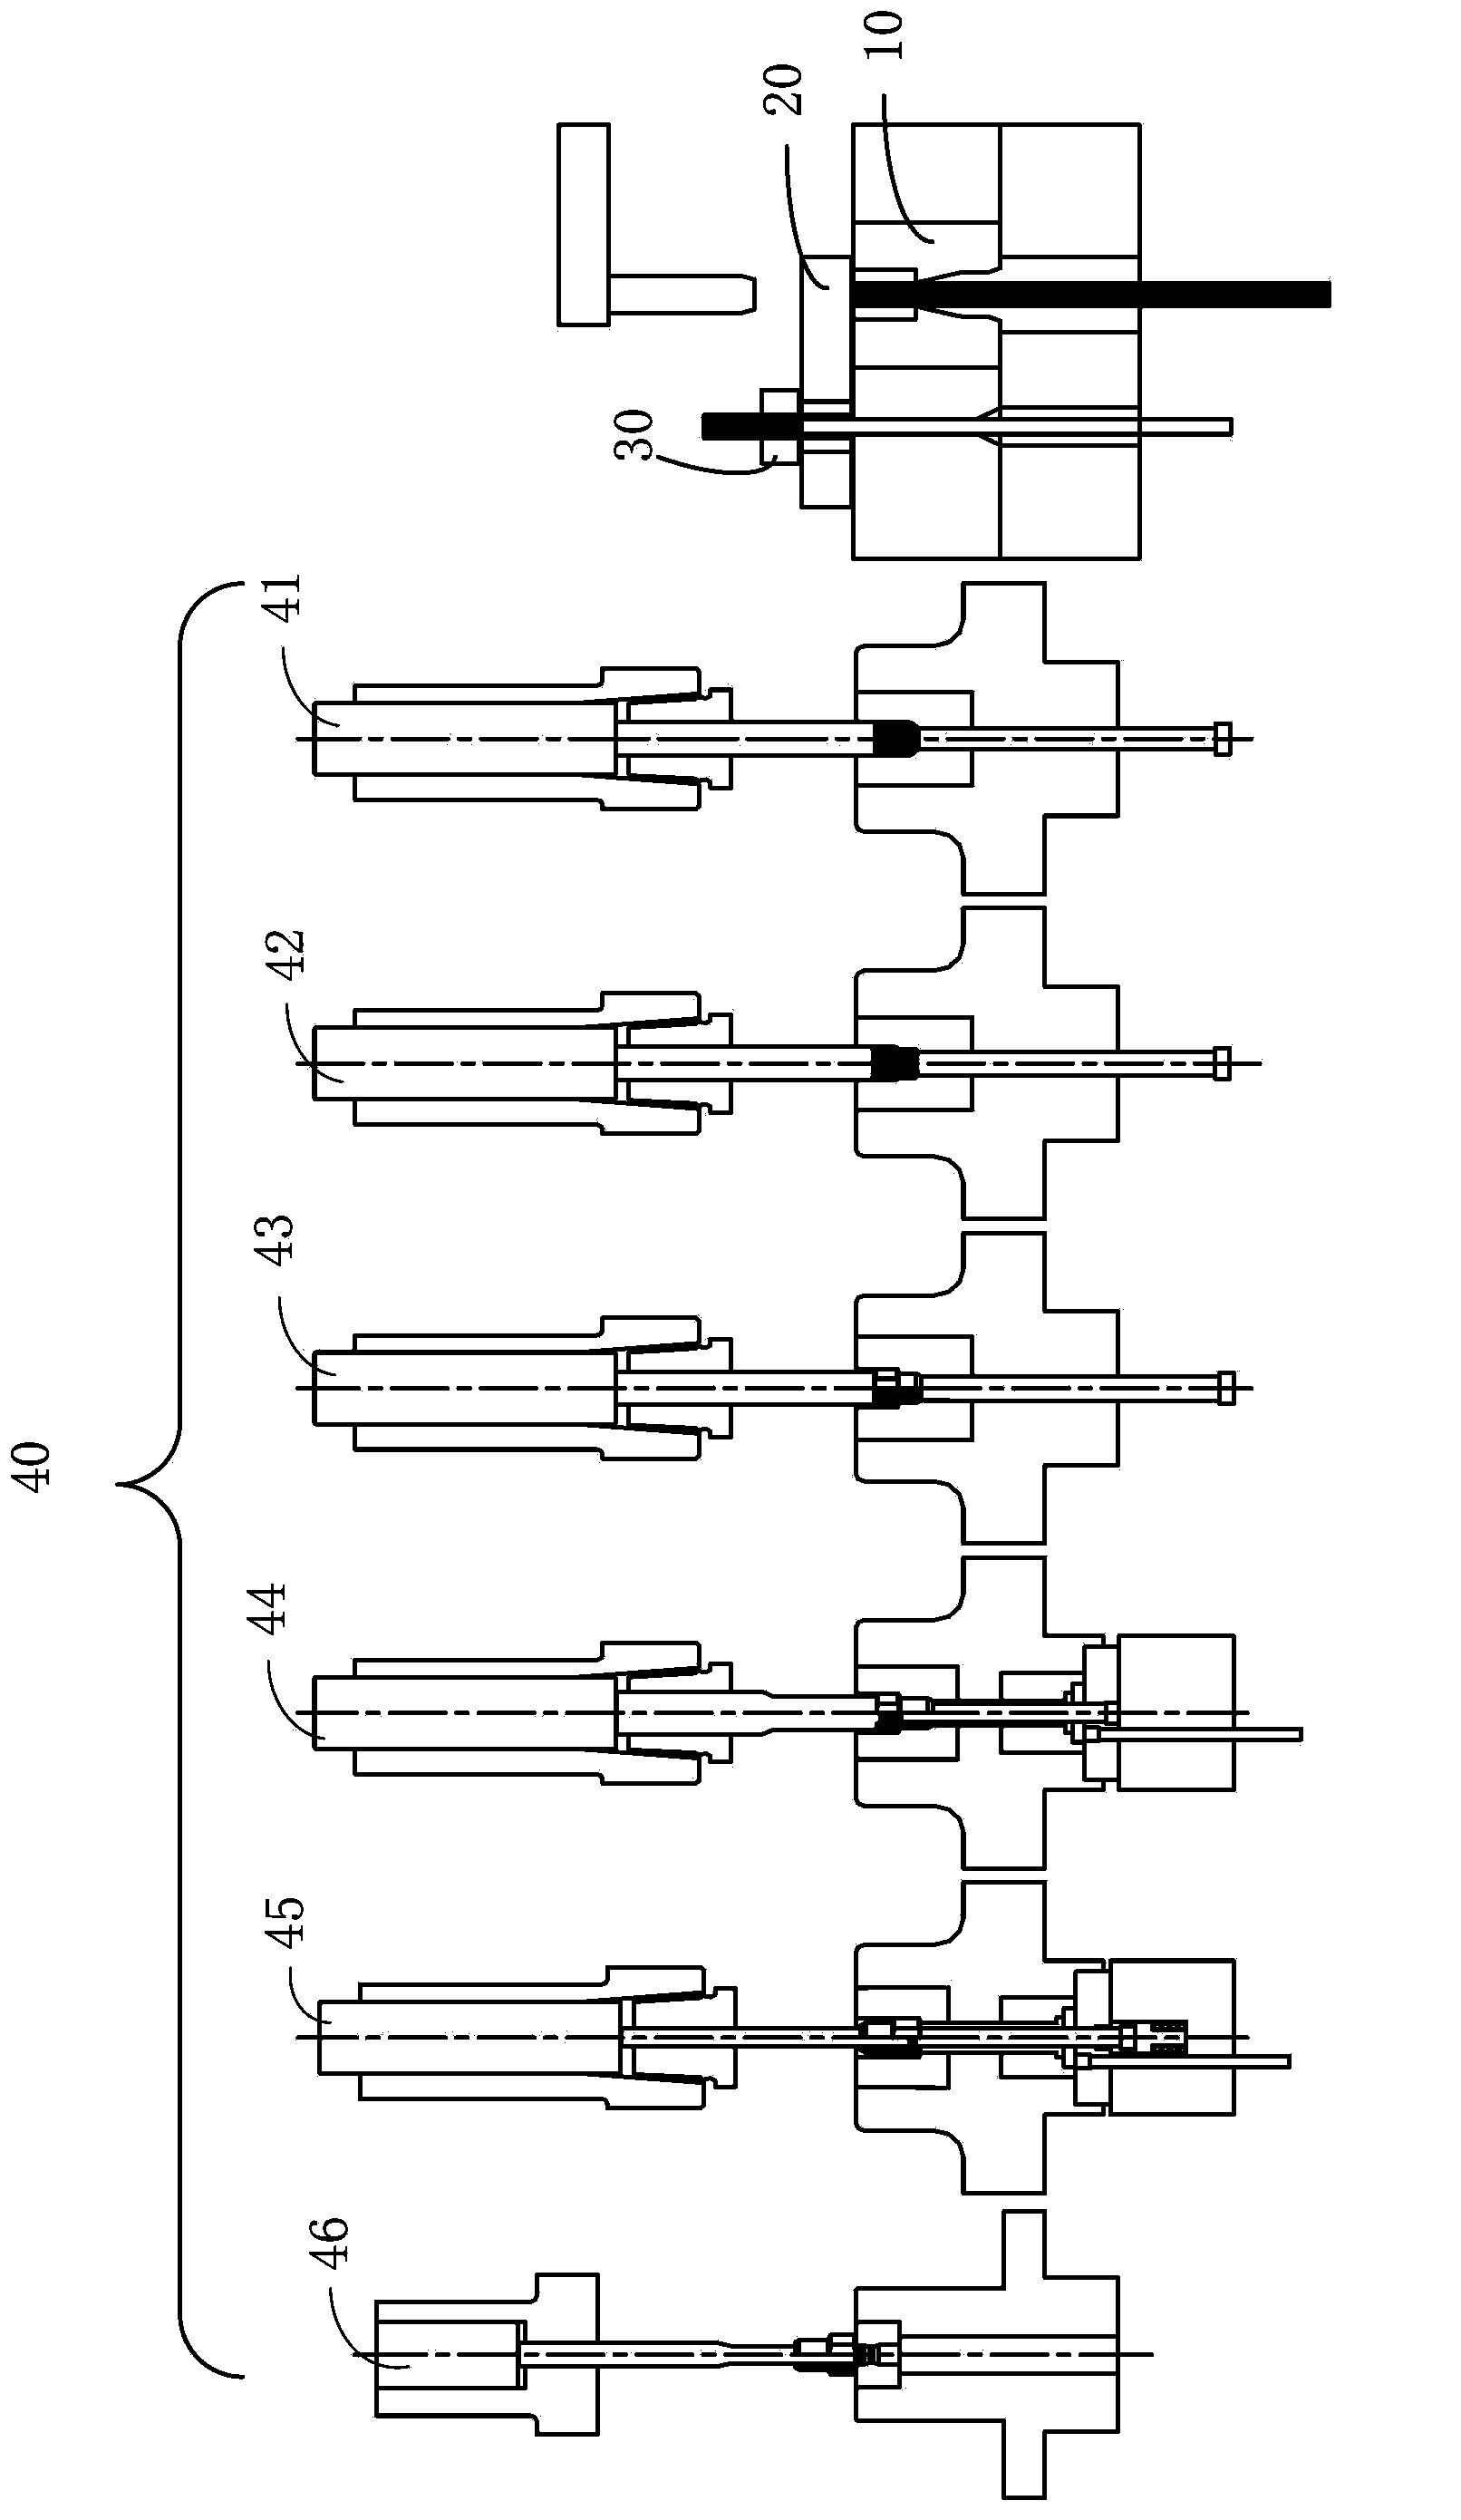 Cold heading device and process for pipe nuts